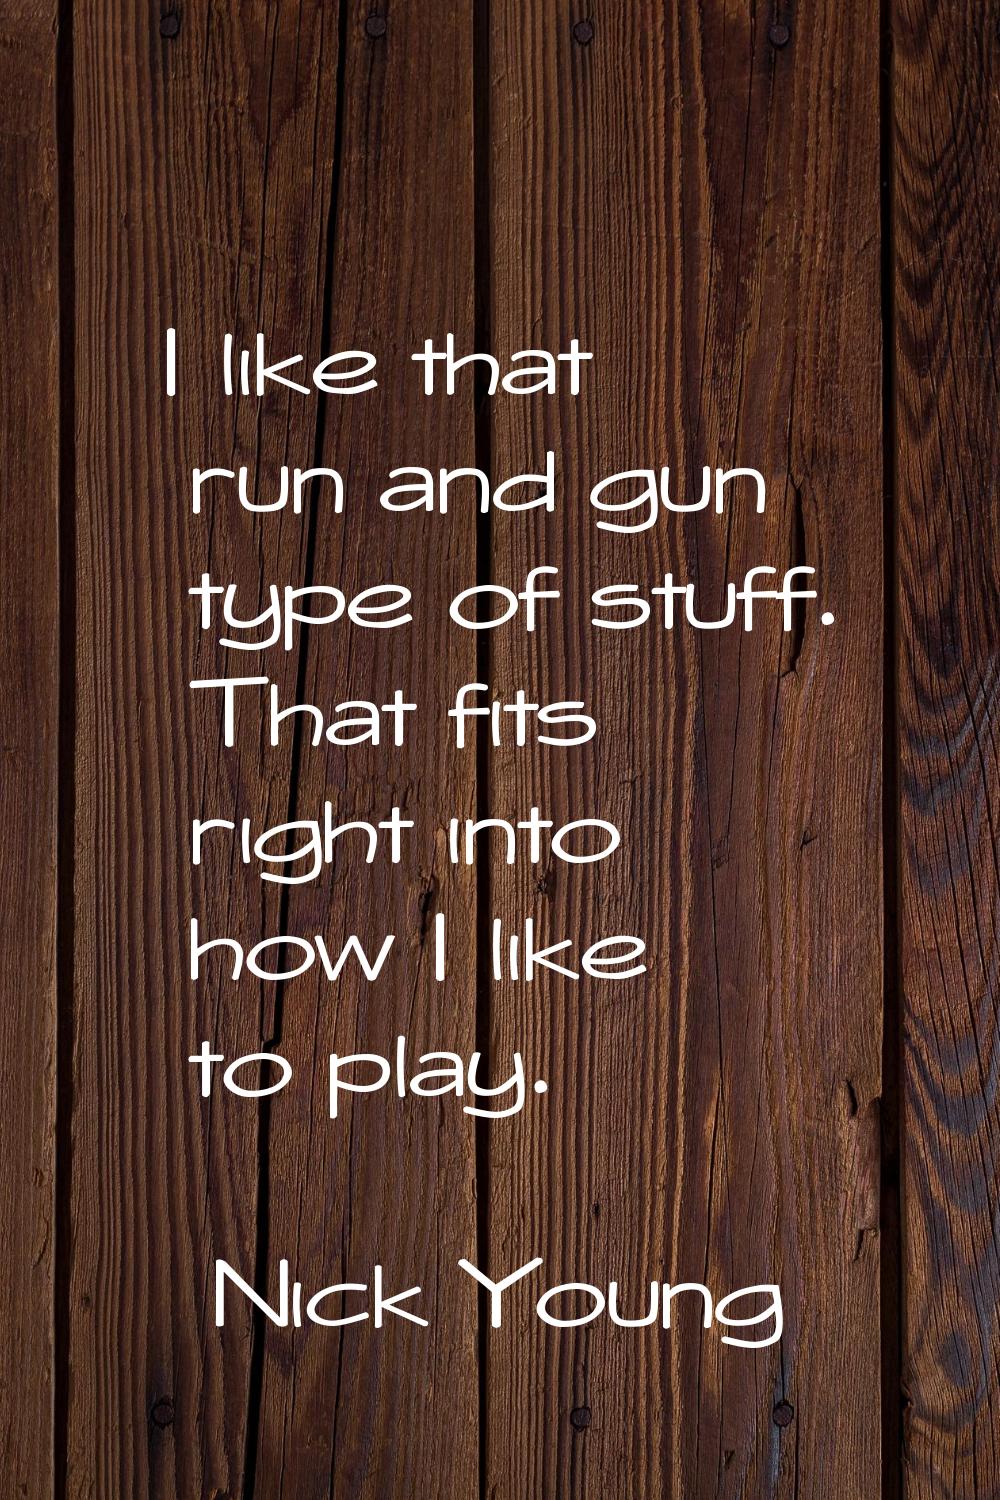 I like that run and gun type of stuff. That fits right into how I like to play.